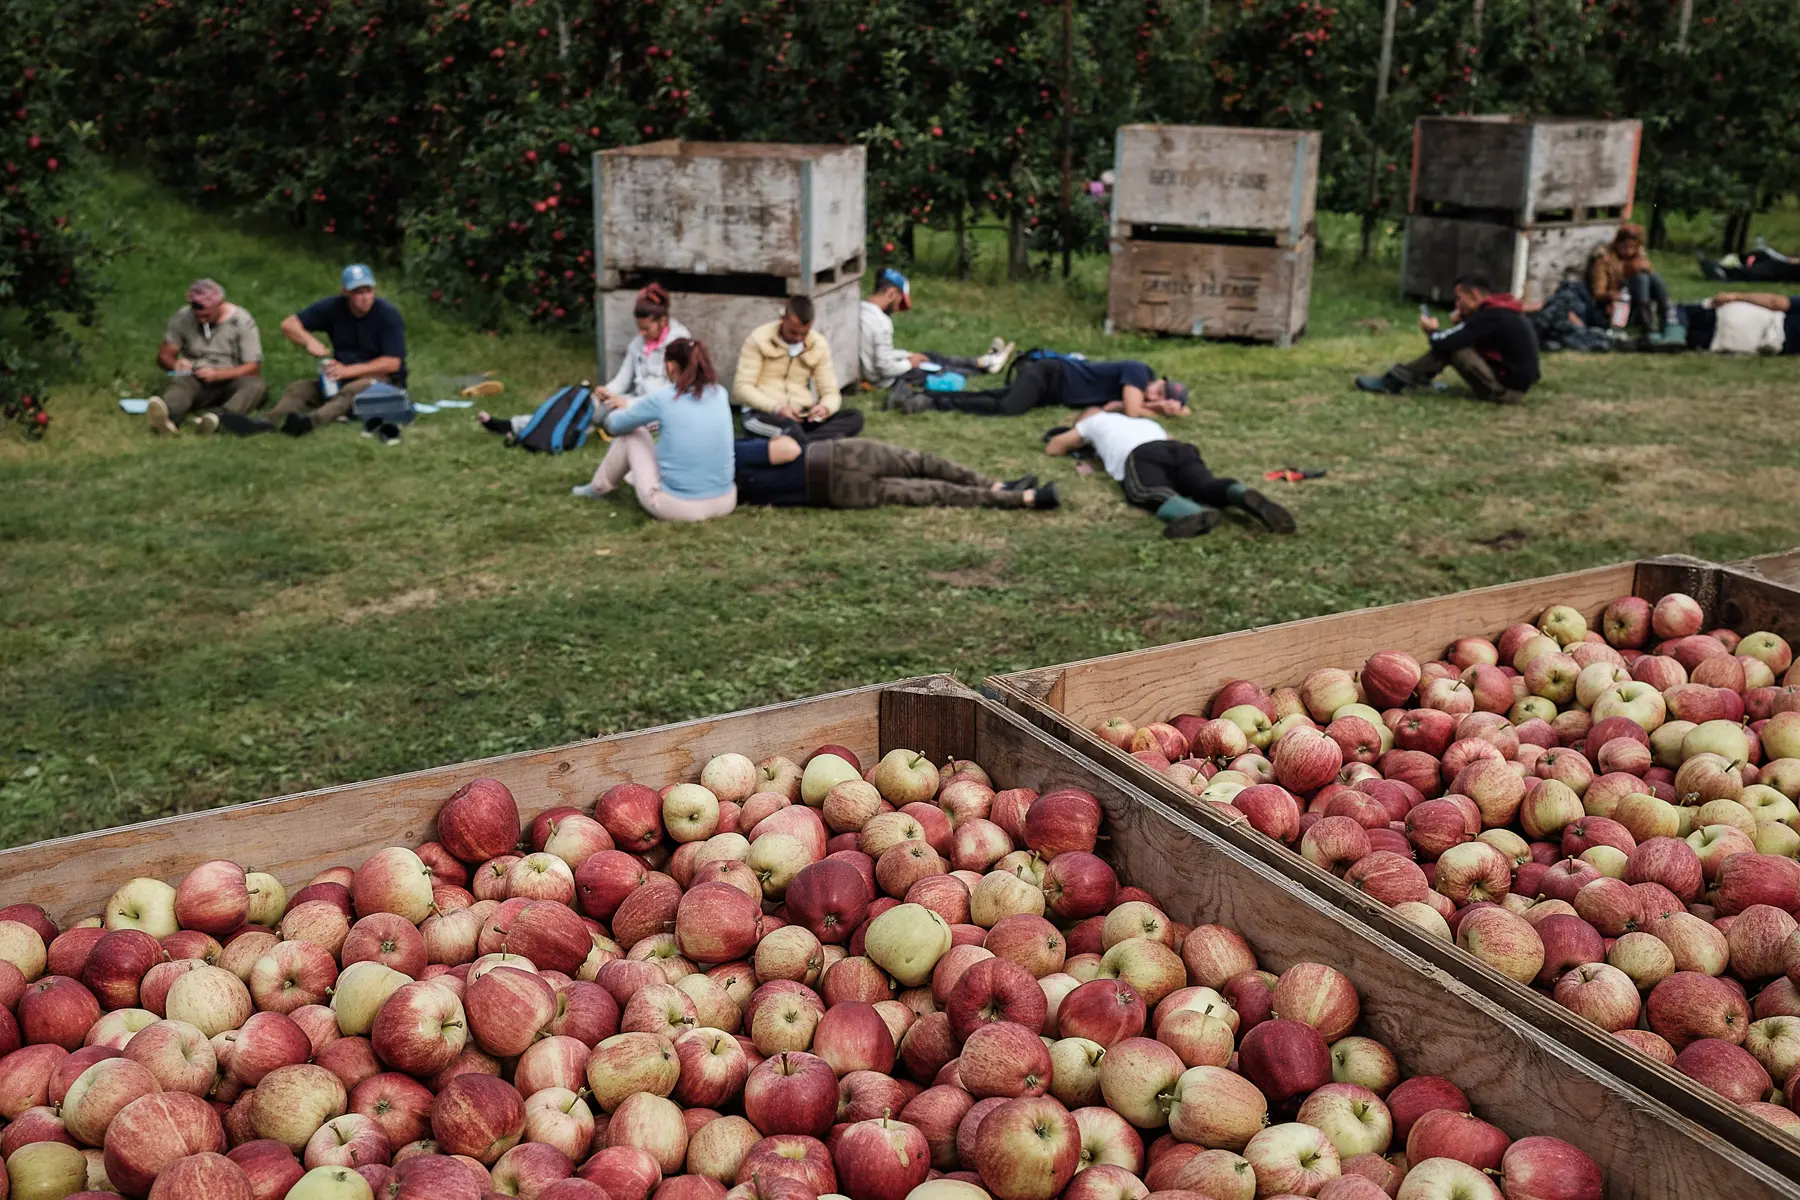 Seasonal apple workers rest next to large apple boxes